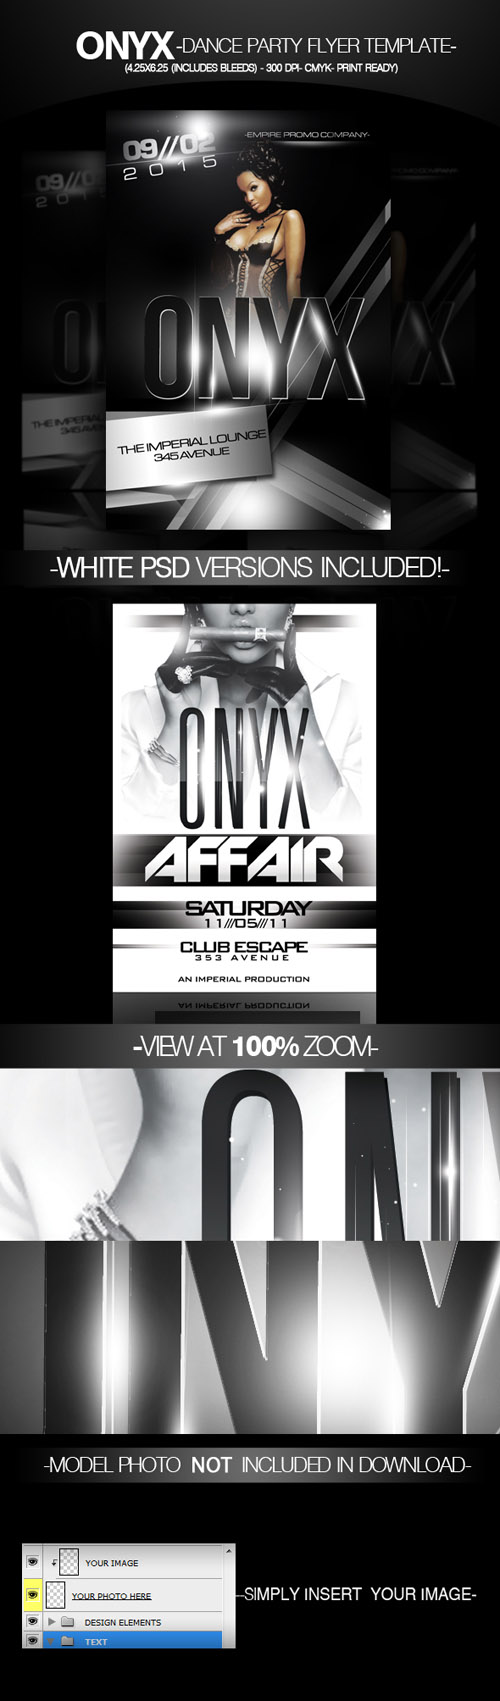 Onyx Black and White Party Flyer